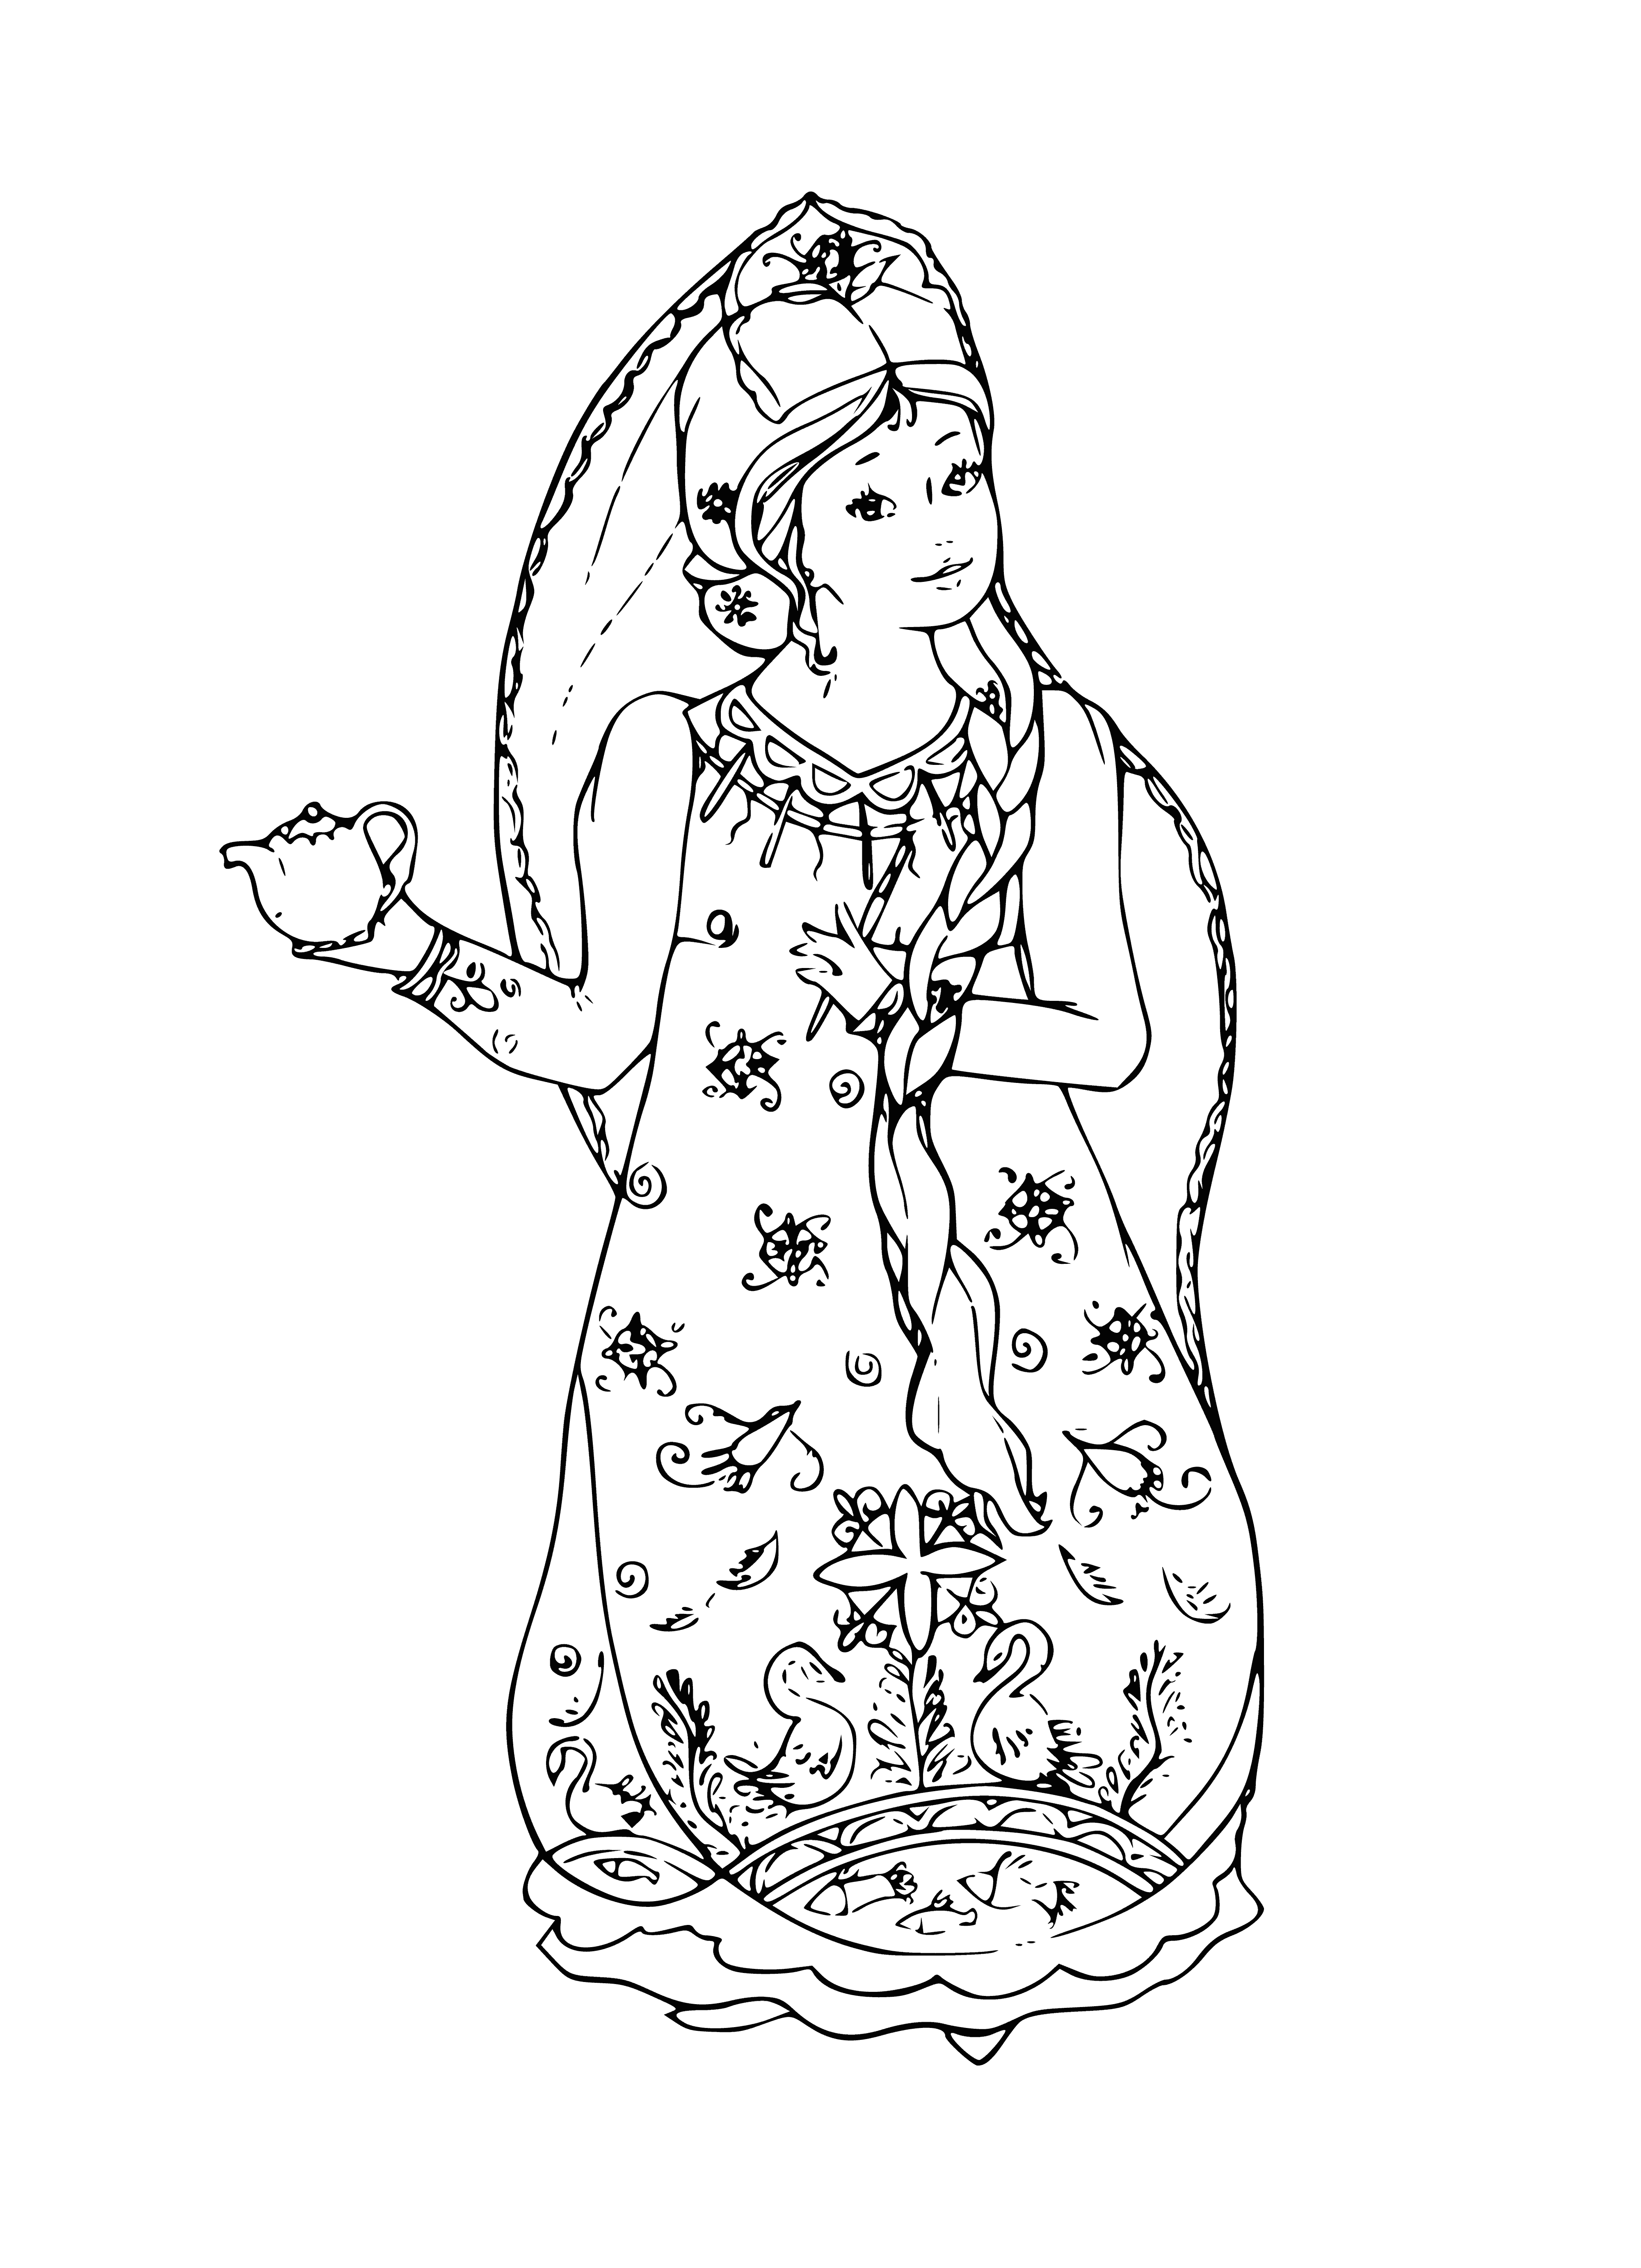 coloring page: Young woman contentedly admires herself in a mirror, necklace & updo while admiring a garden view.